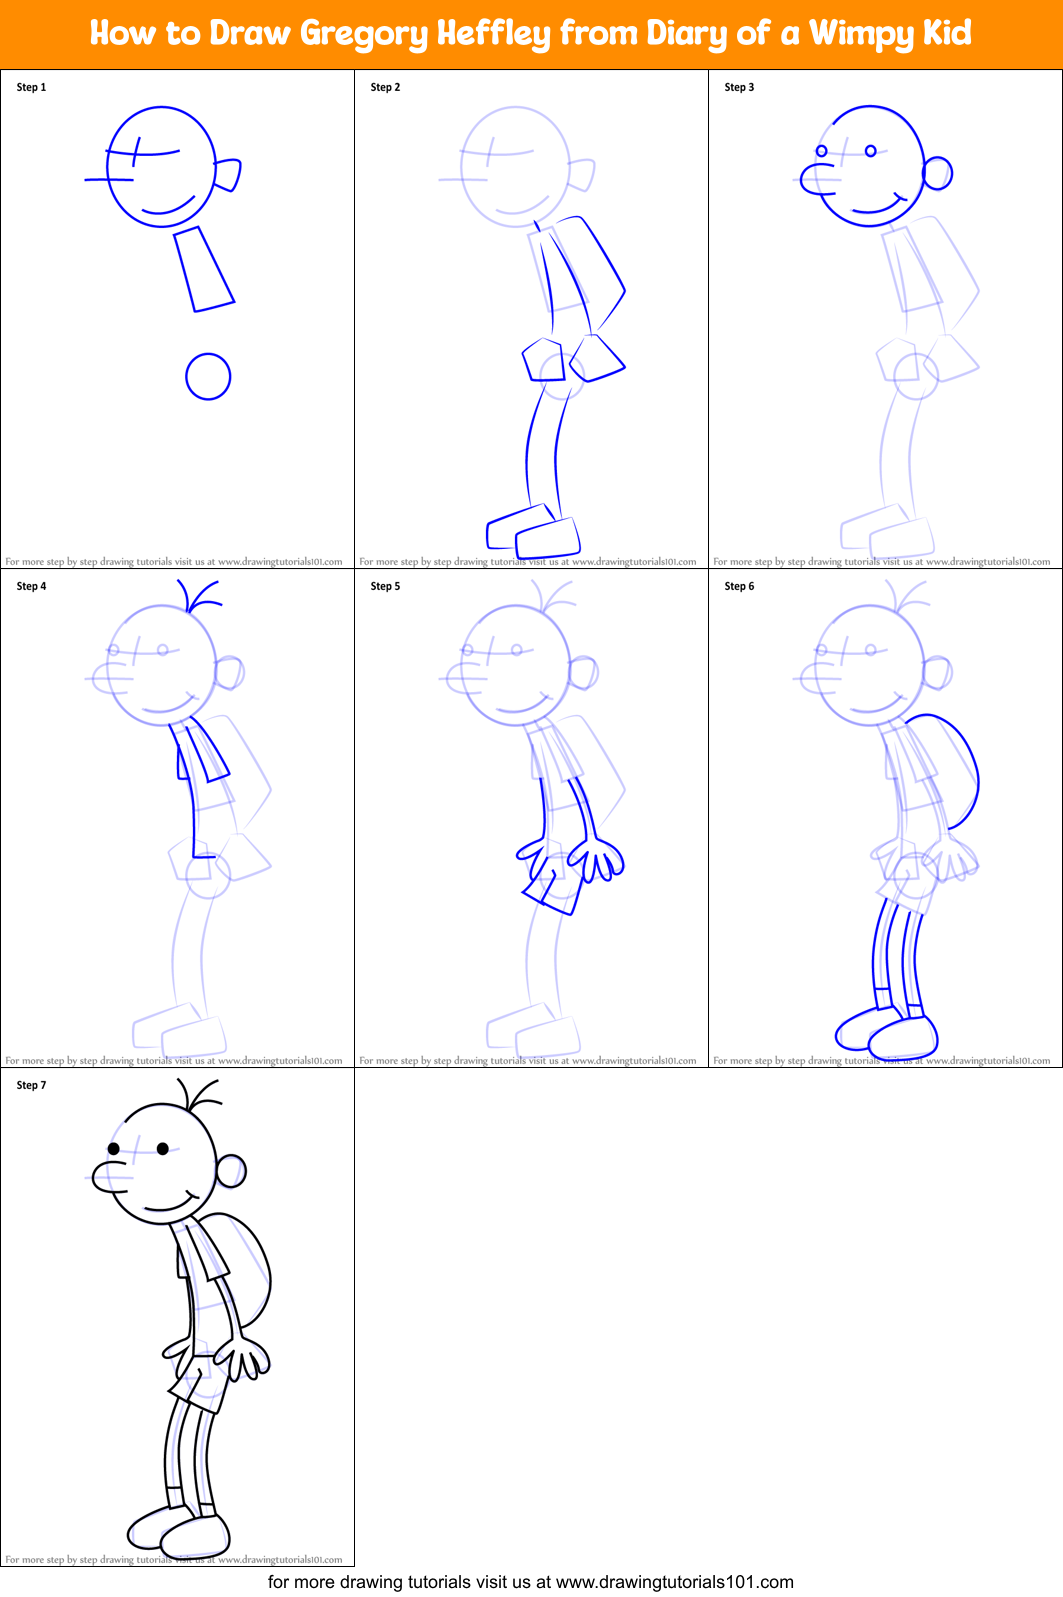 how-to-draw-gregory-heffley-from-diary-of-a-wimpy-kid-printable-step-by